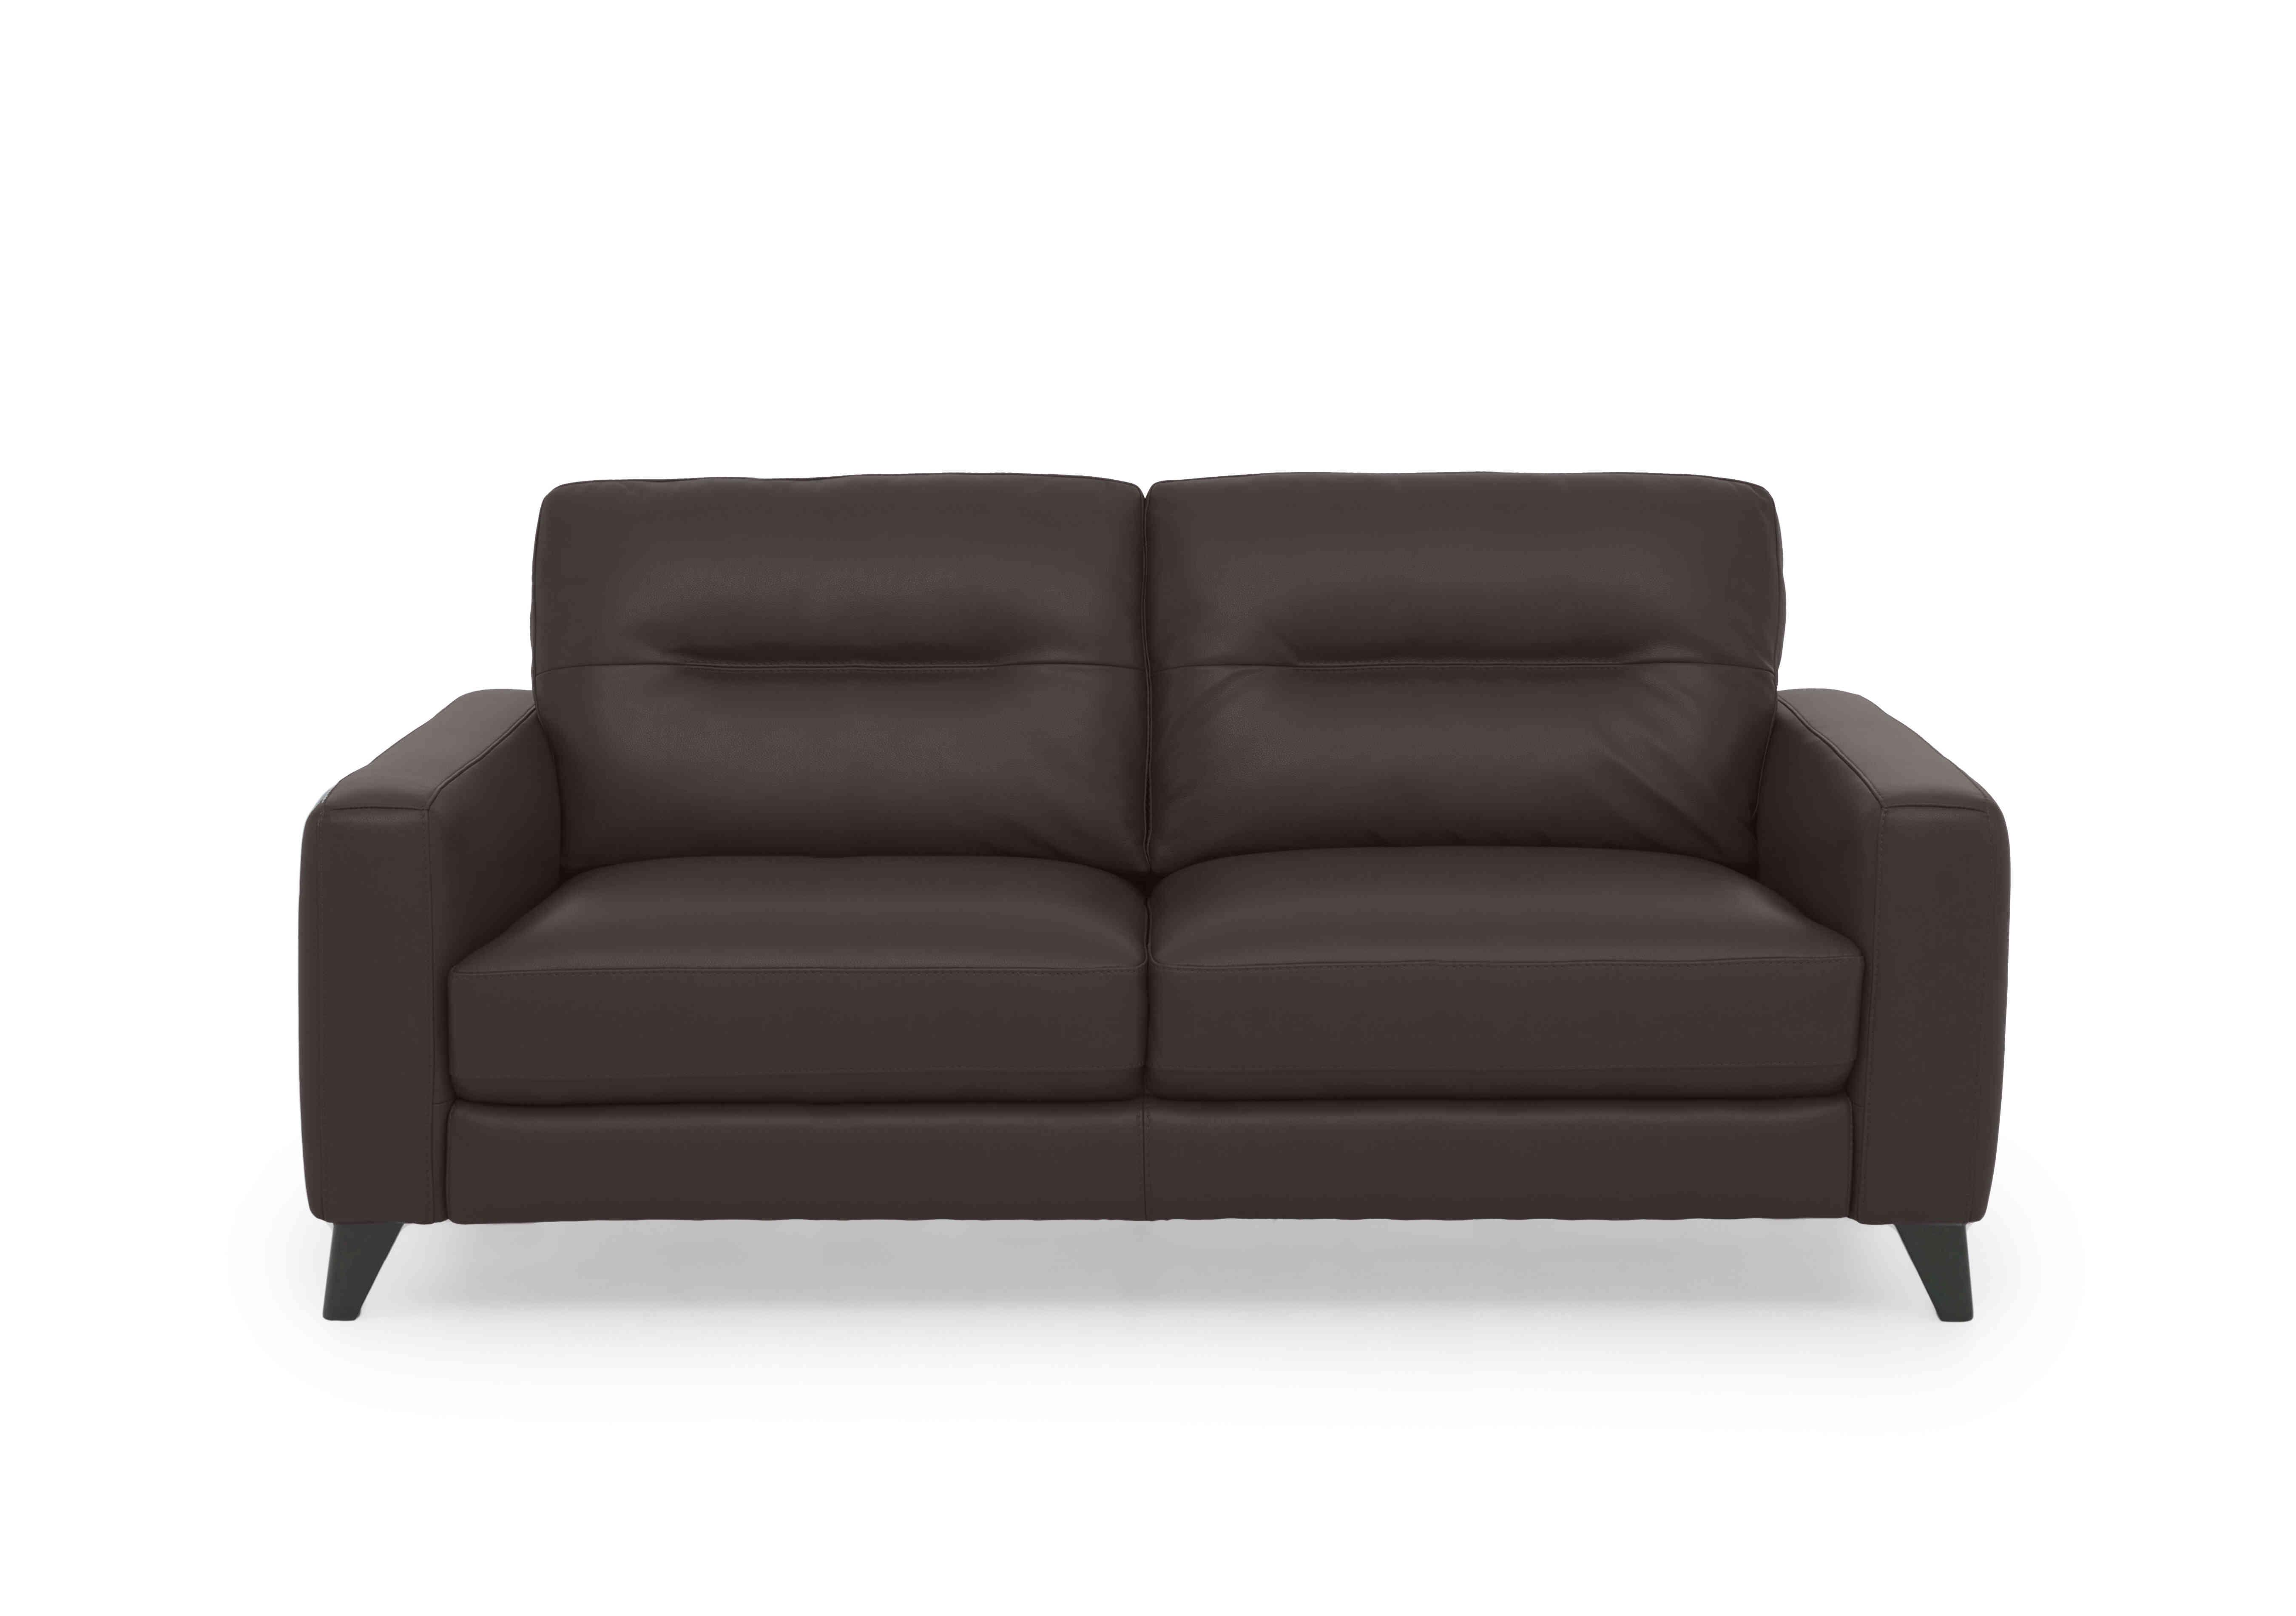 Jules 3 Seater Leather Sofa in An-727b Dark Brown on Furniture Village